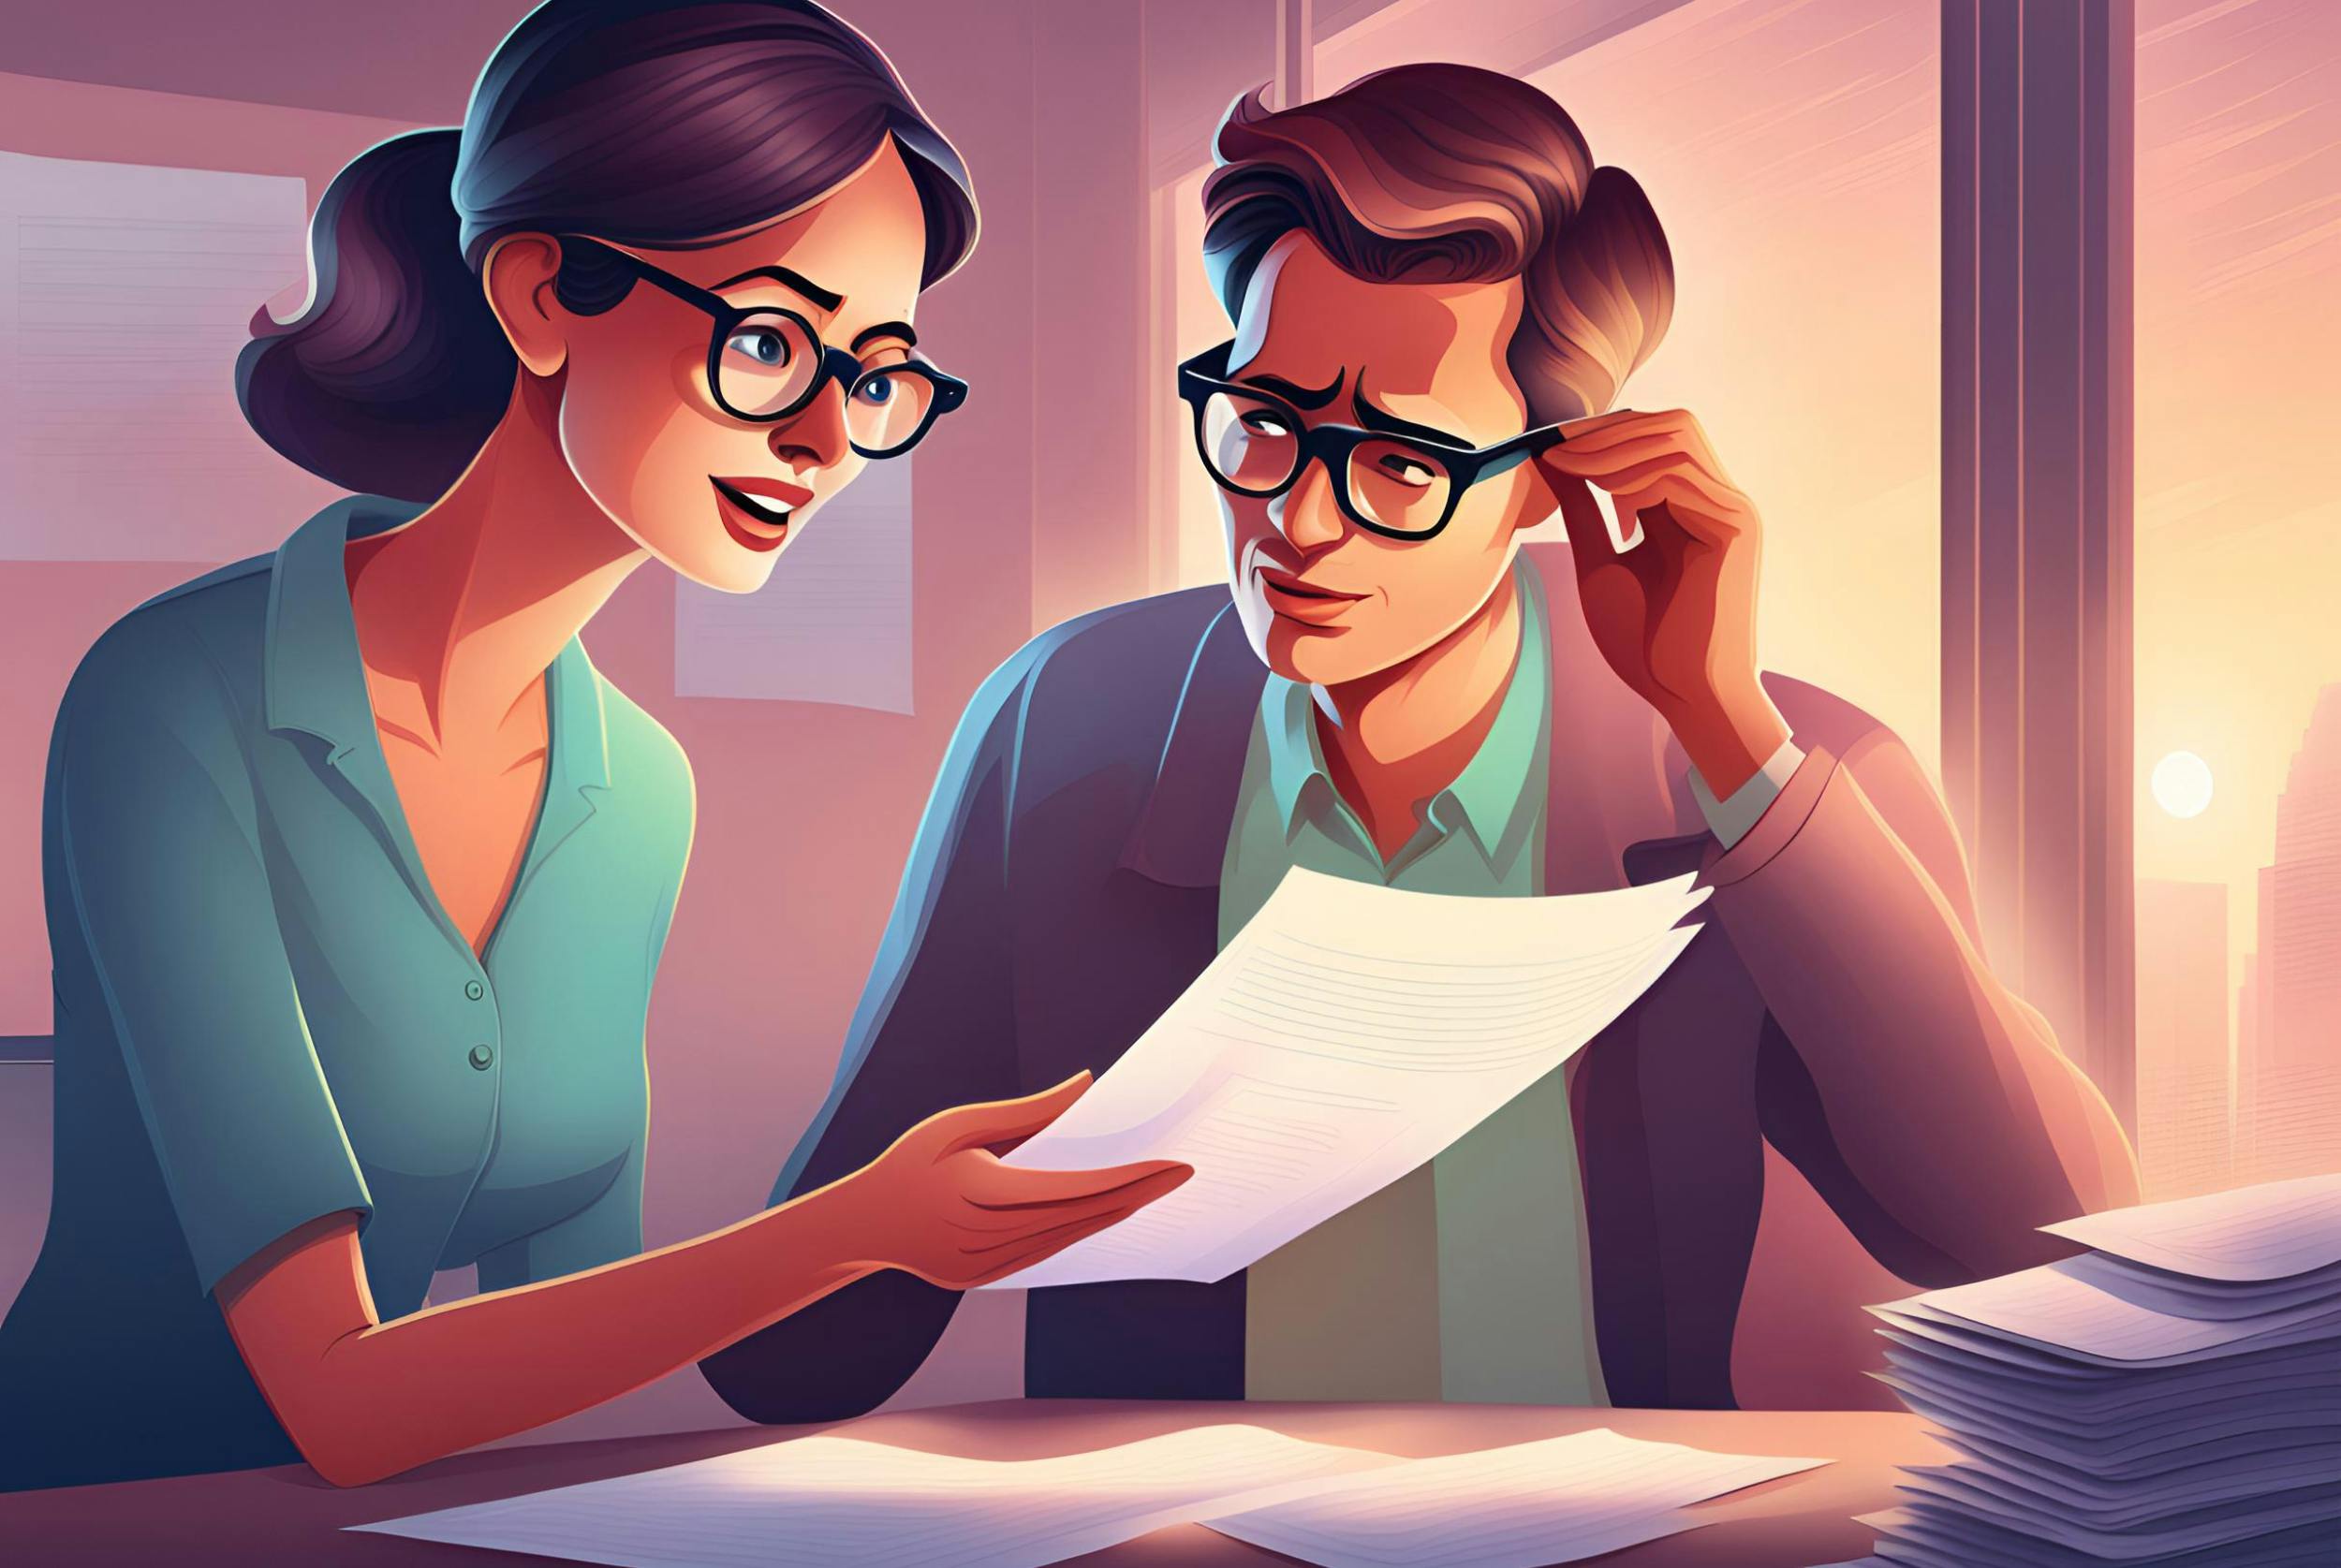 Illustration of a man and woman looking at a piece of paper together